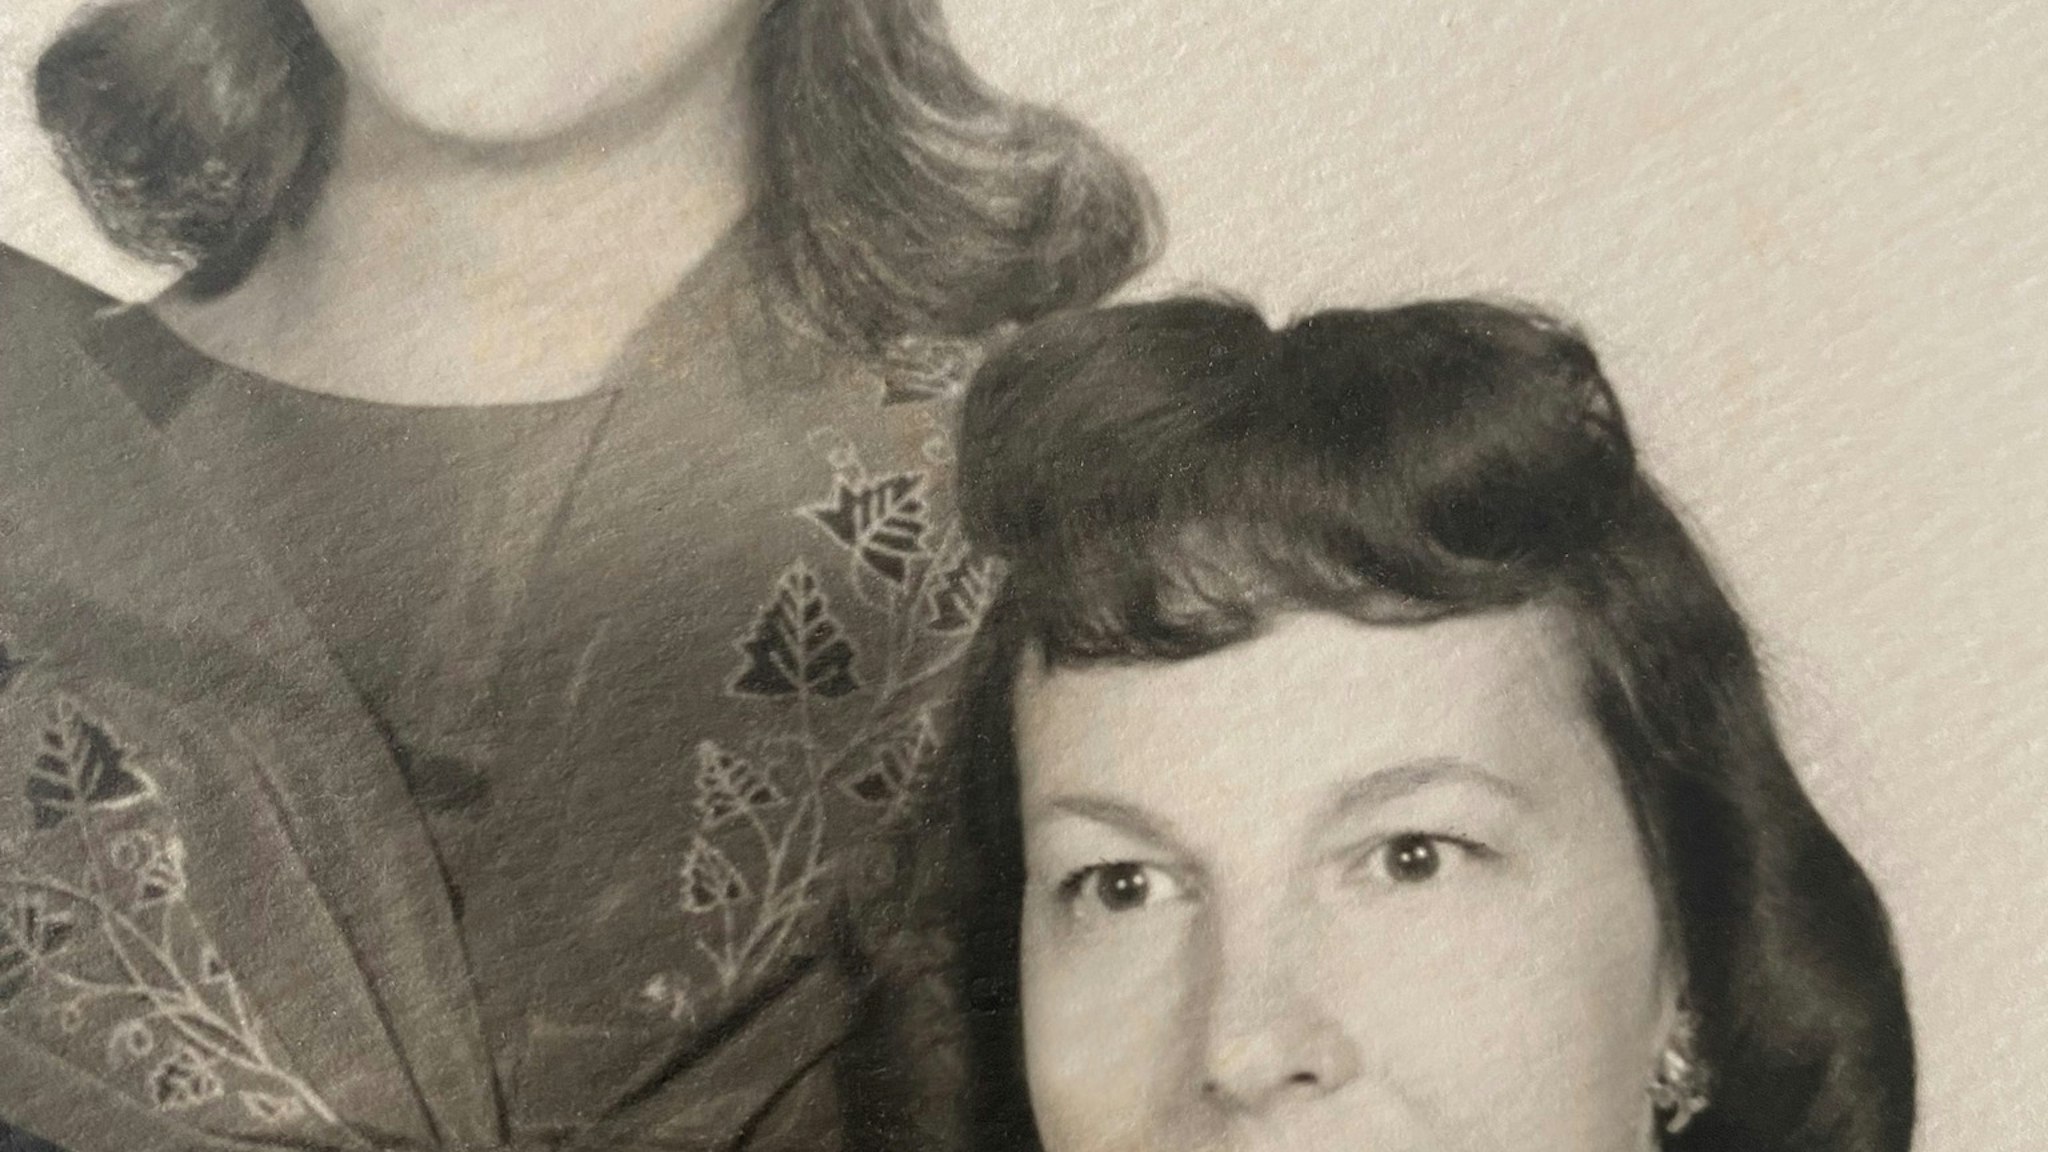 Florida's 'Trunk Lady' identified as Sylvia Atherton nearly 54 years after body found.